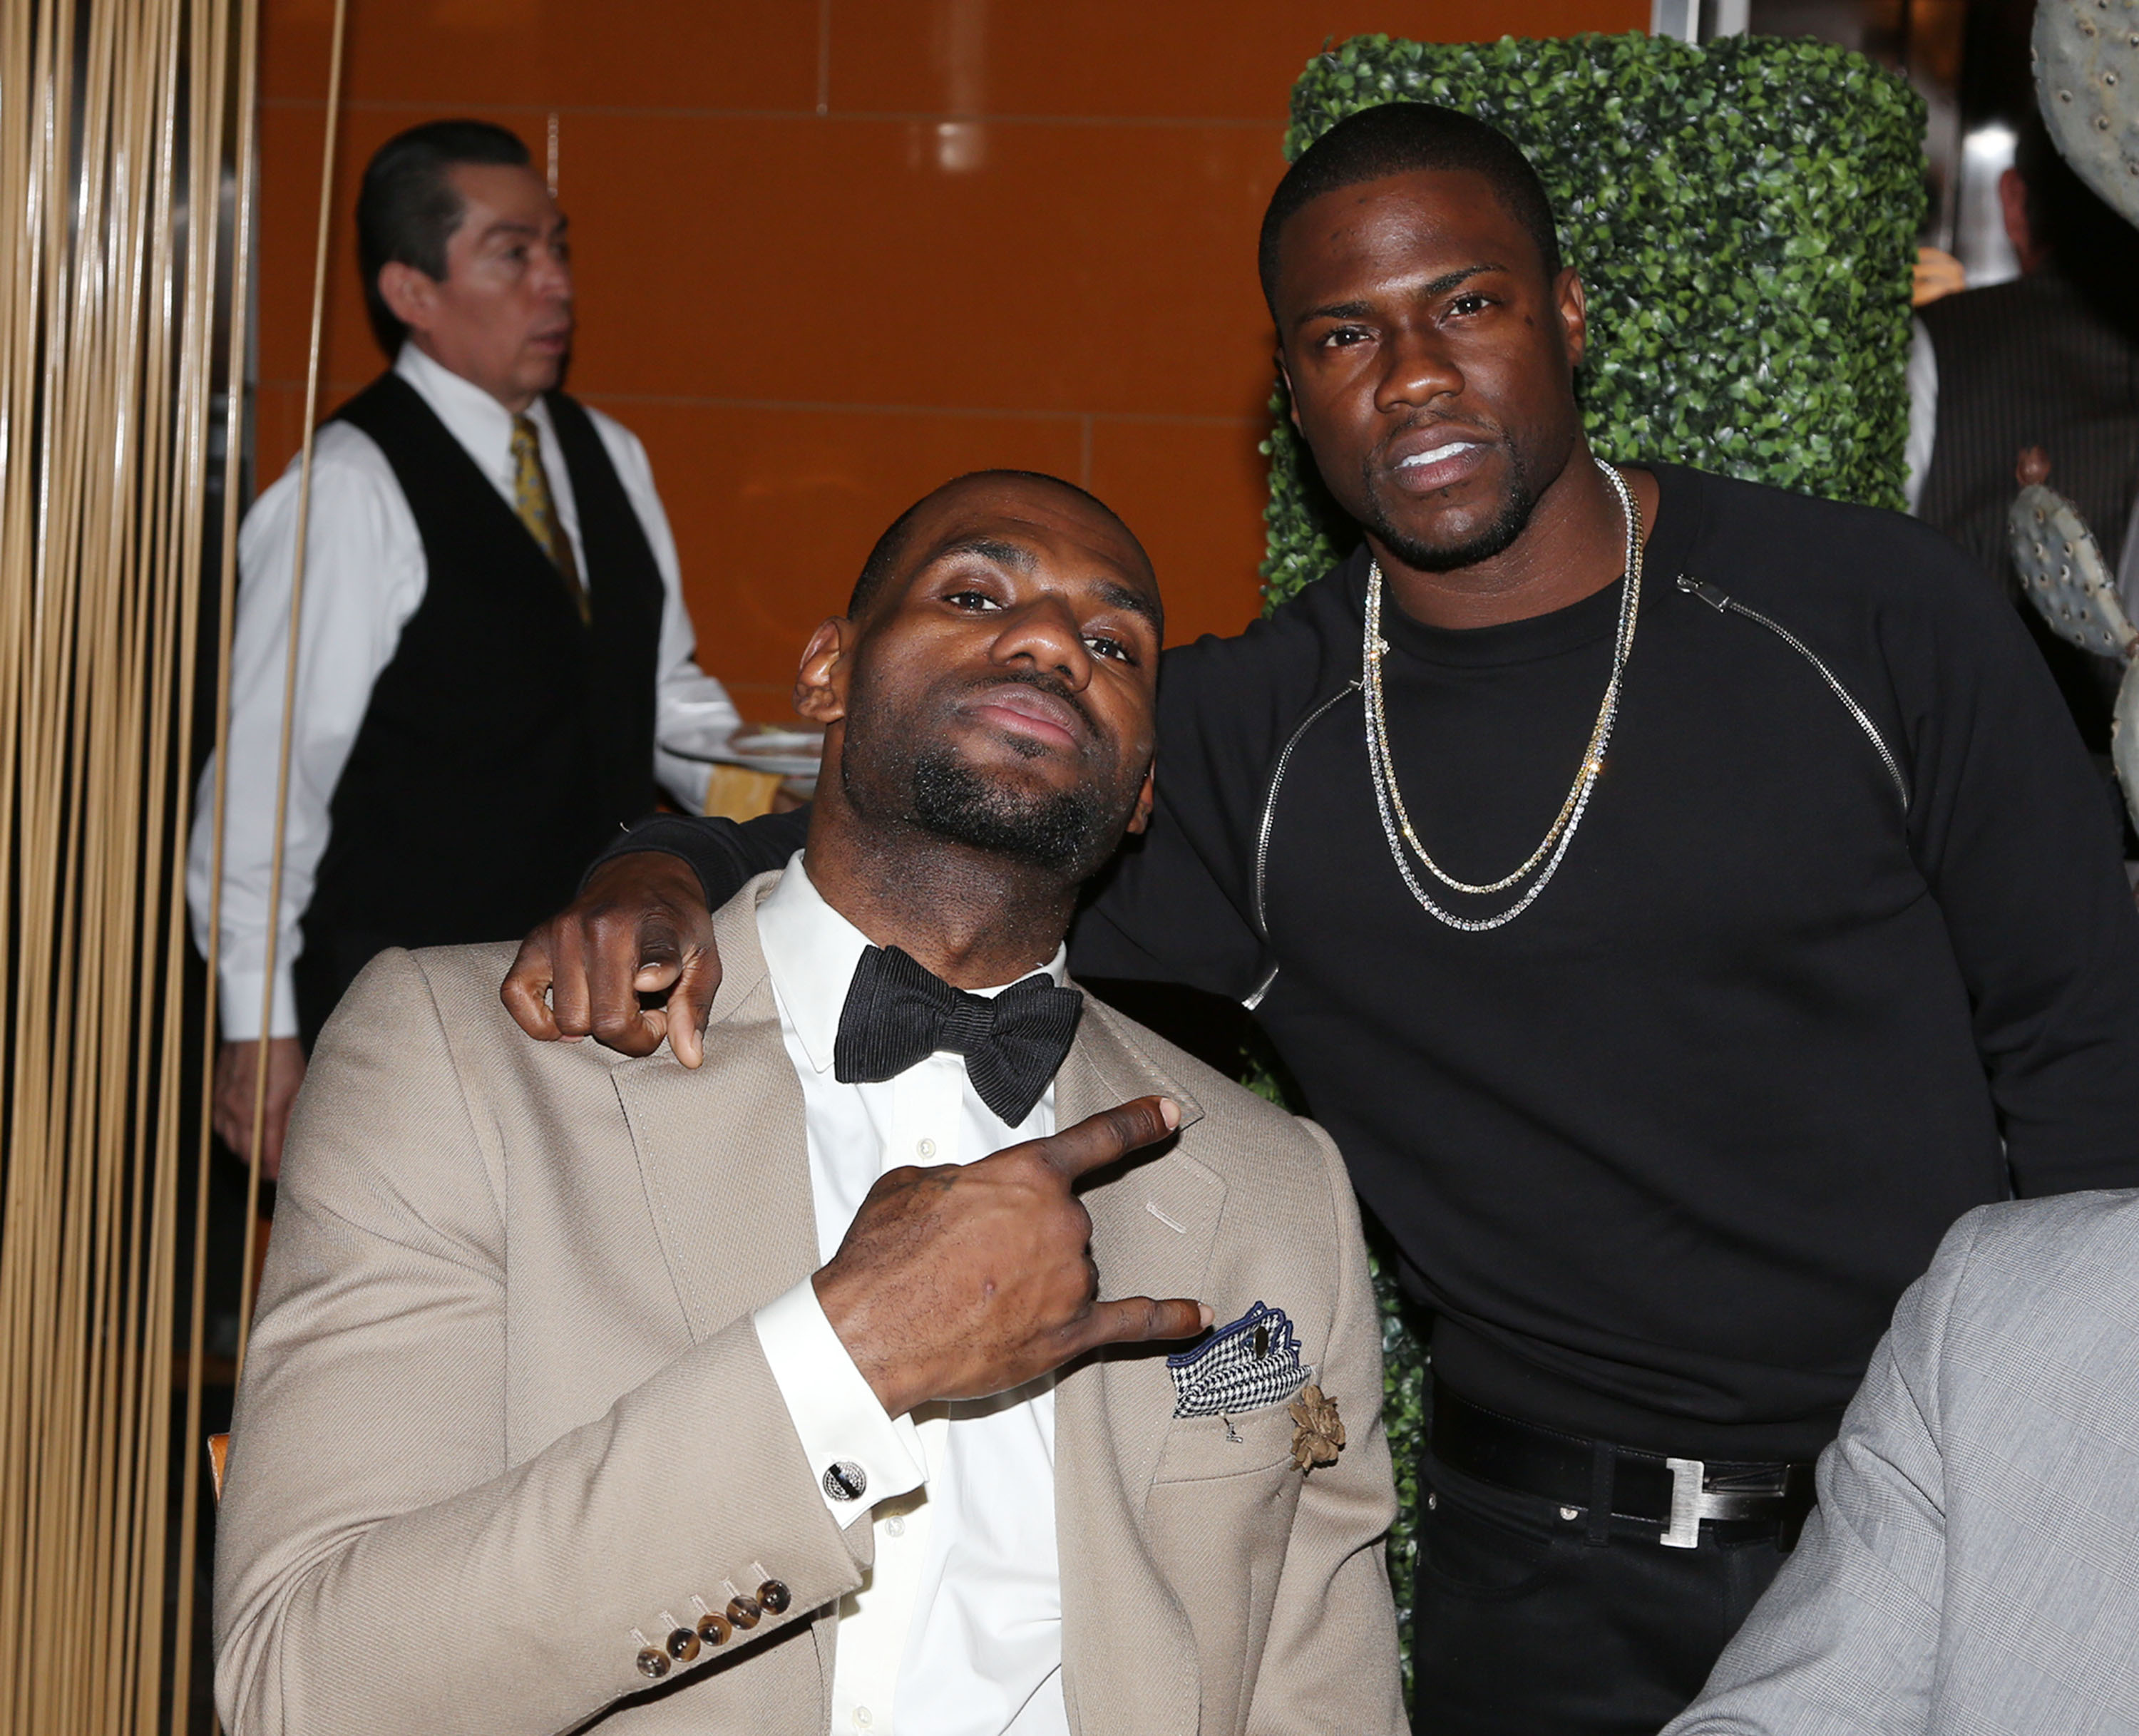 LeBron James and Kevin Hart taking a picture together at an event